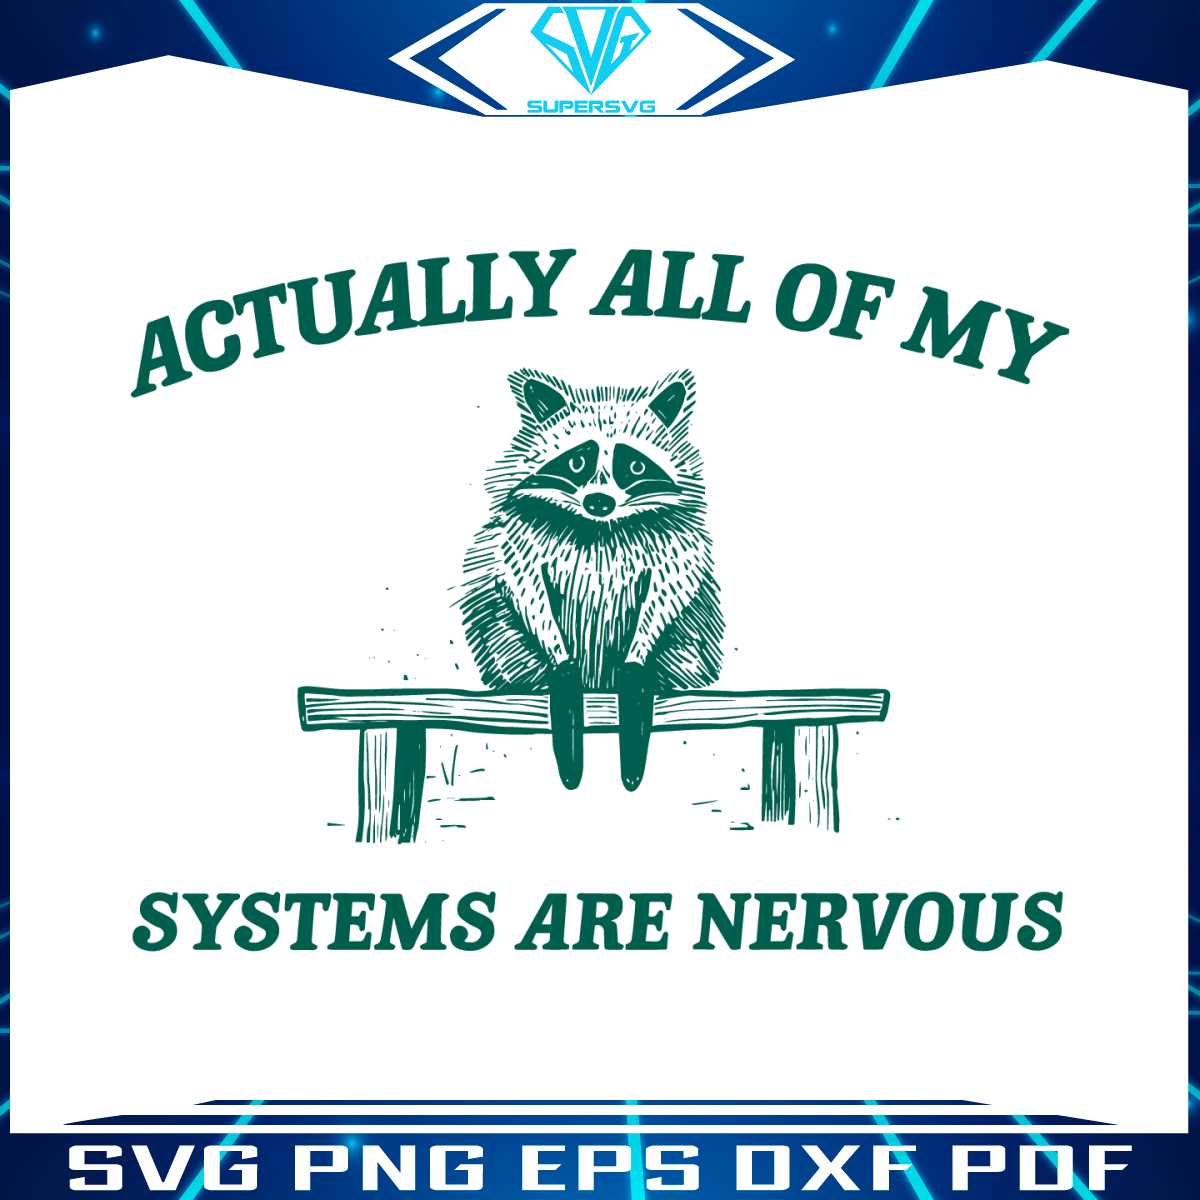 actually-all-my-systems-are-nervous-svg